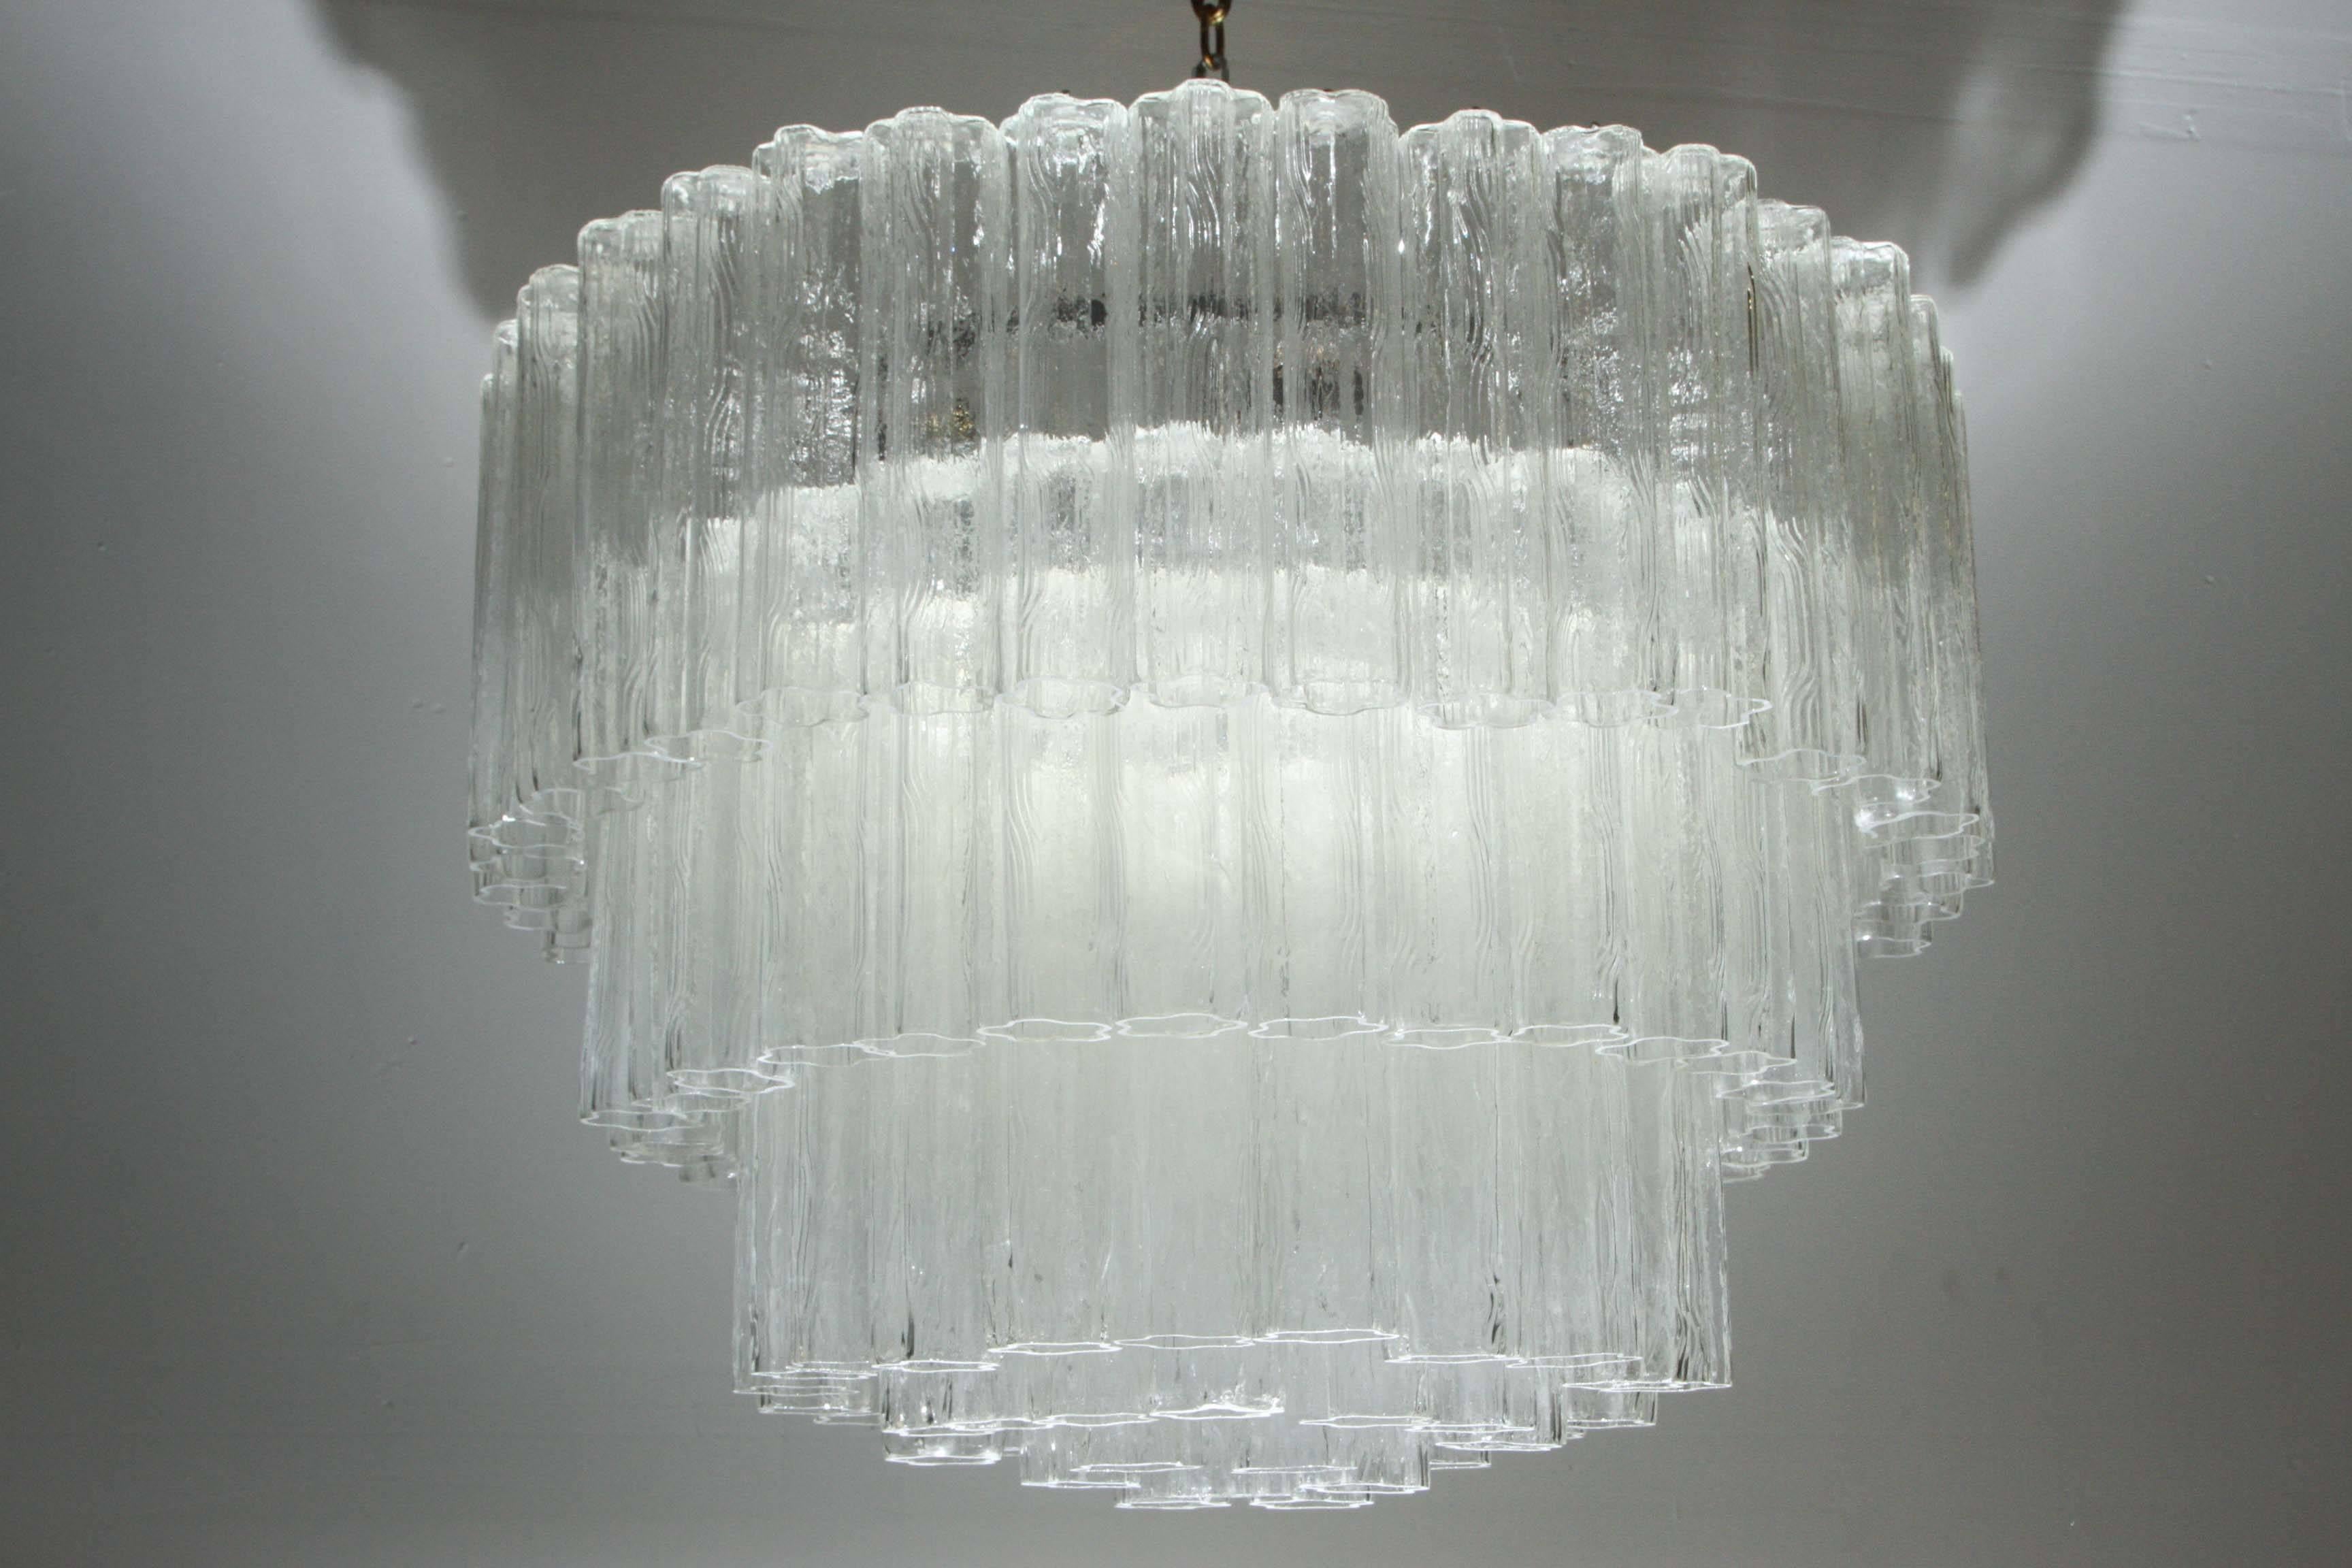 Italian Large Five-Tier Tronchi Tube Chandelier by Camer